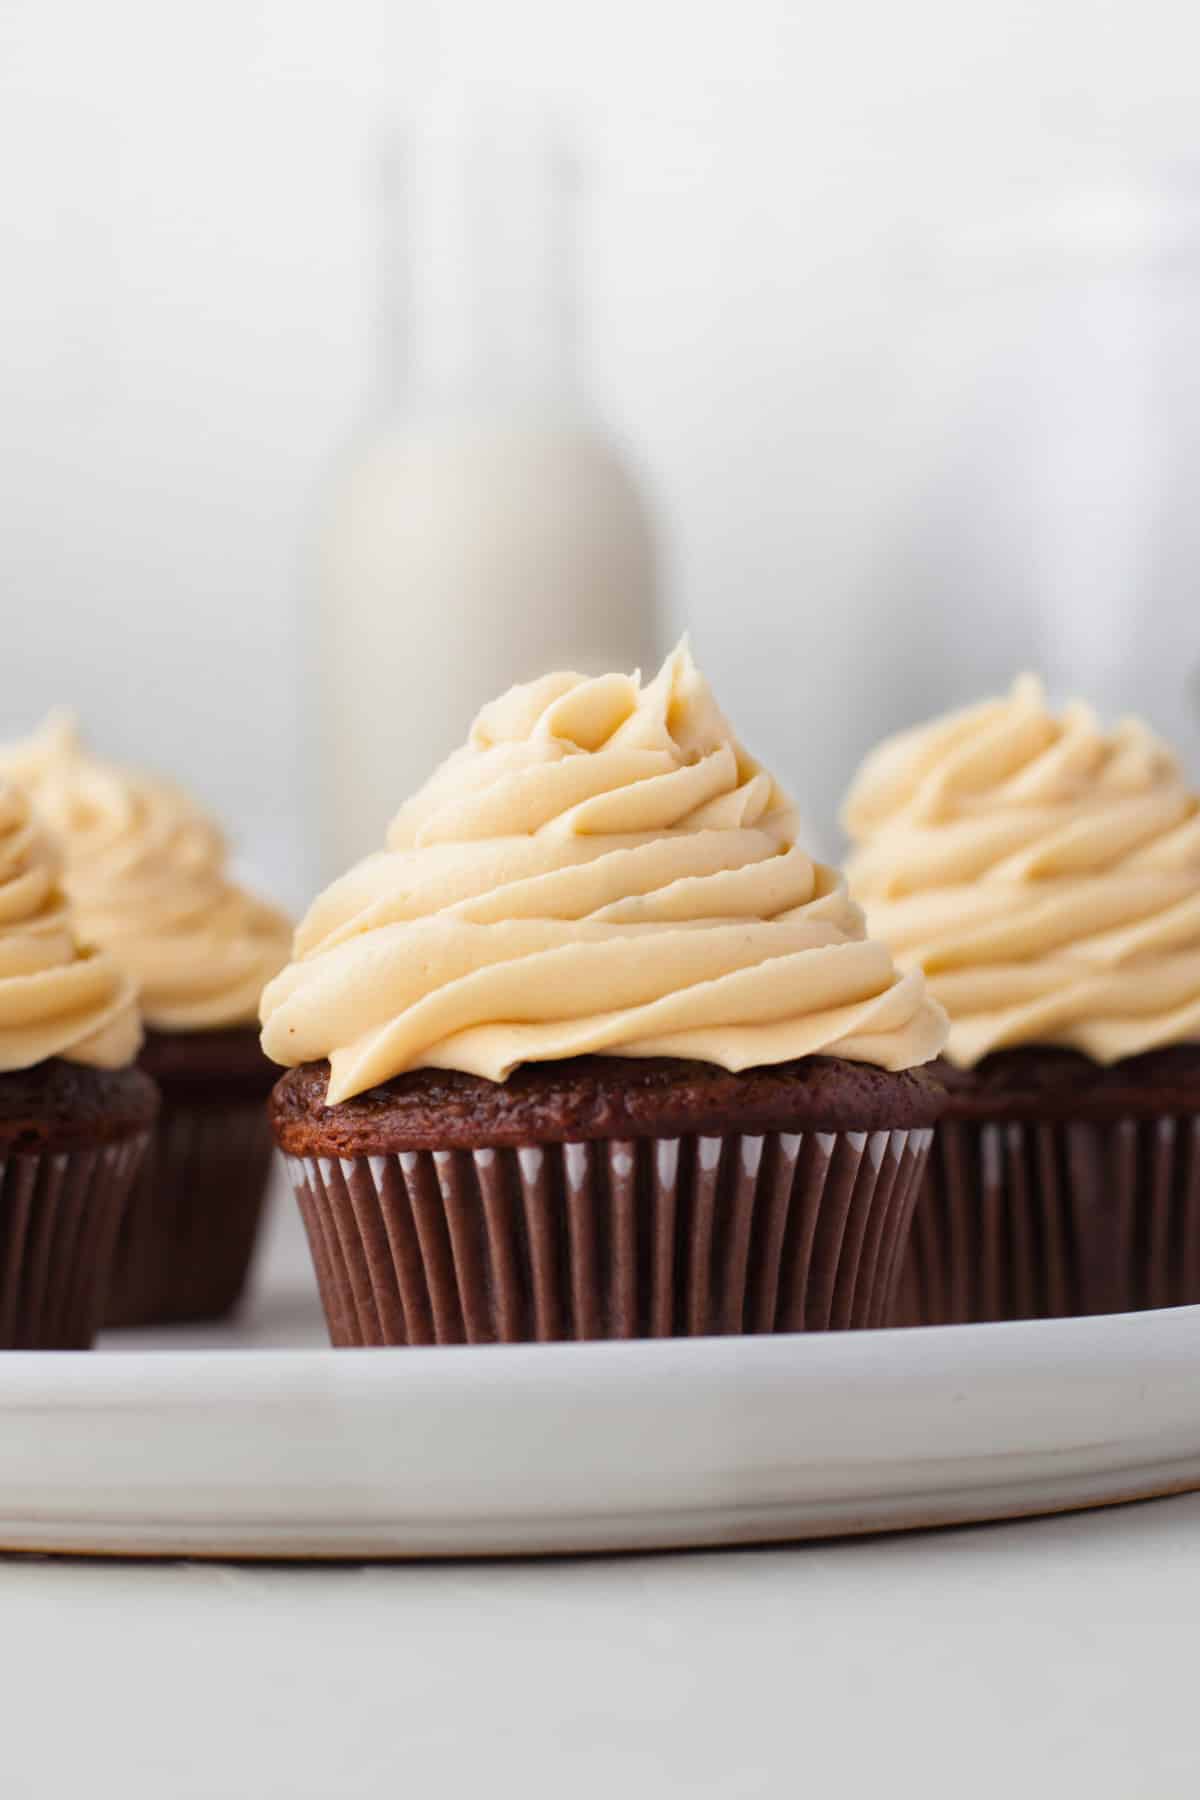 Four chocolate cupcakes topped with caramel buttercream frosting.